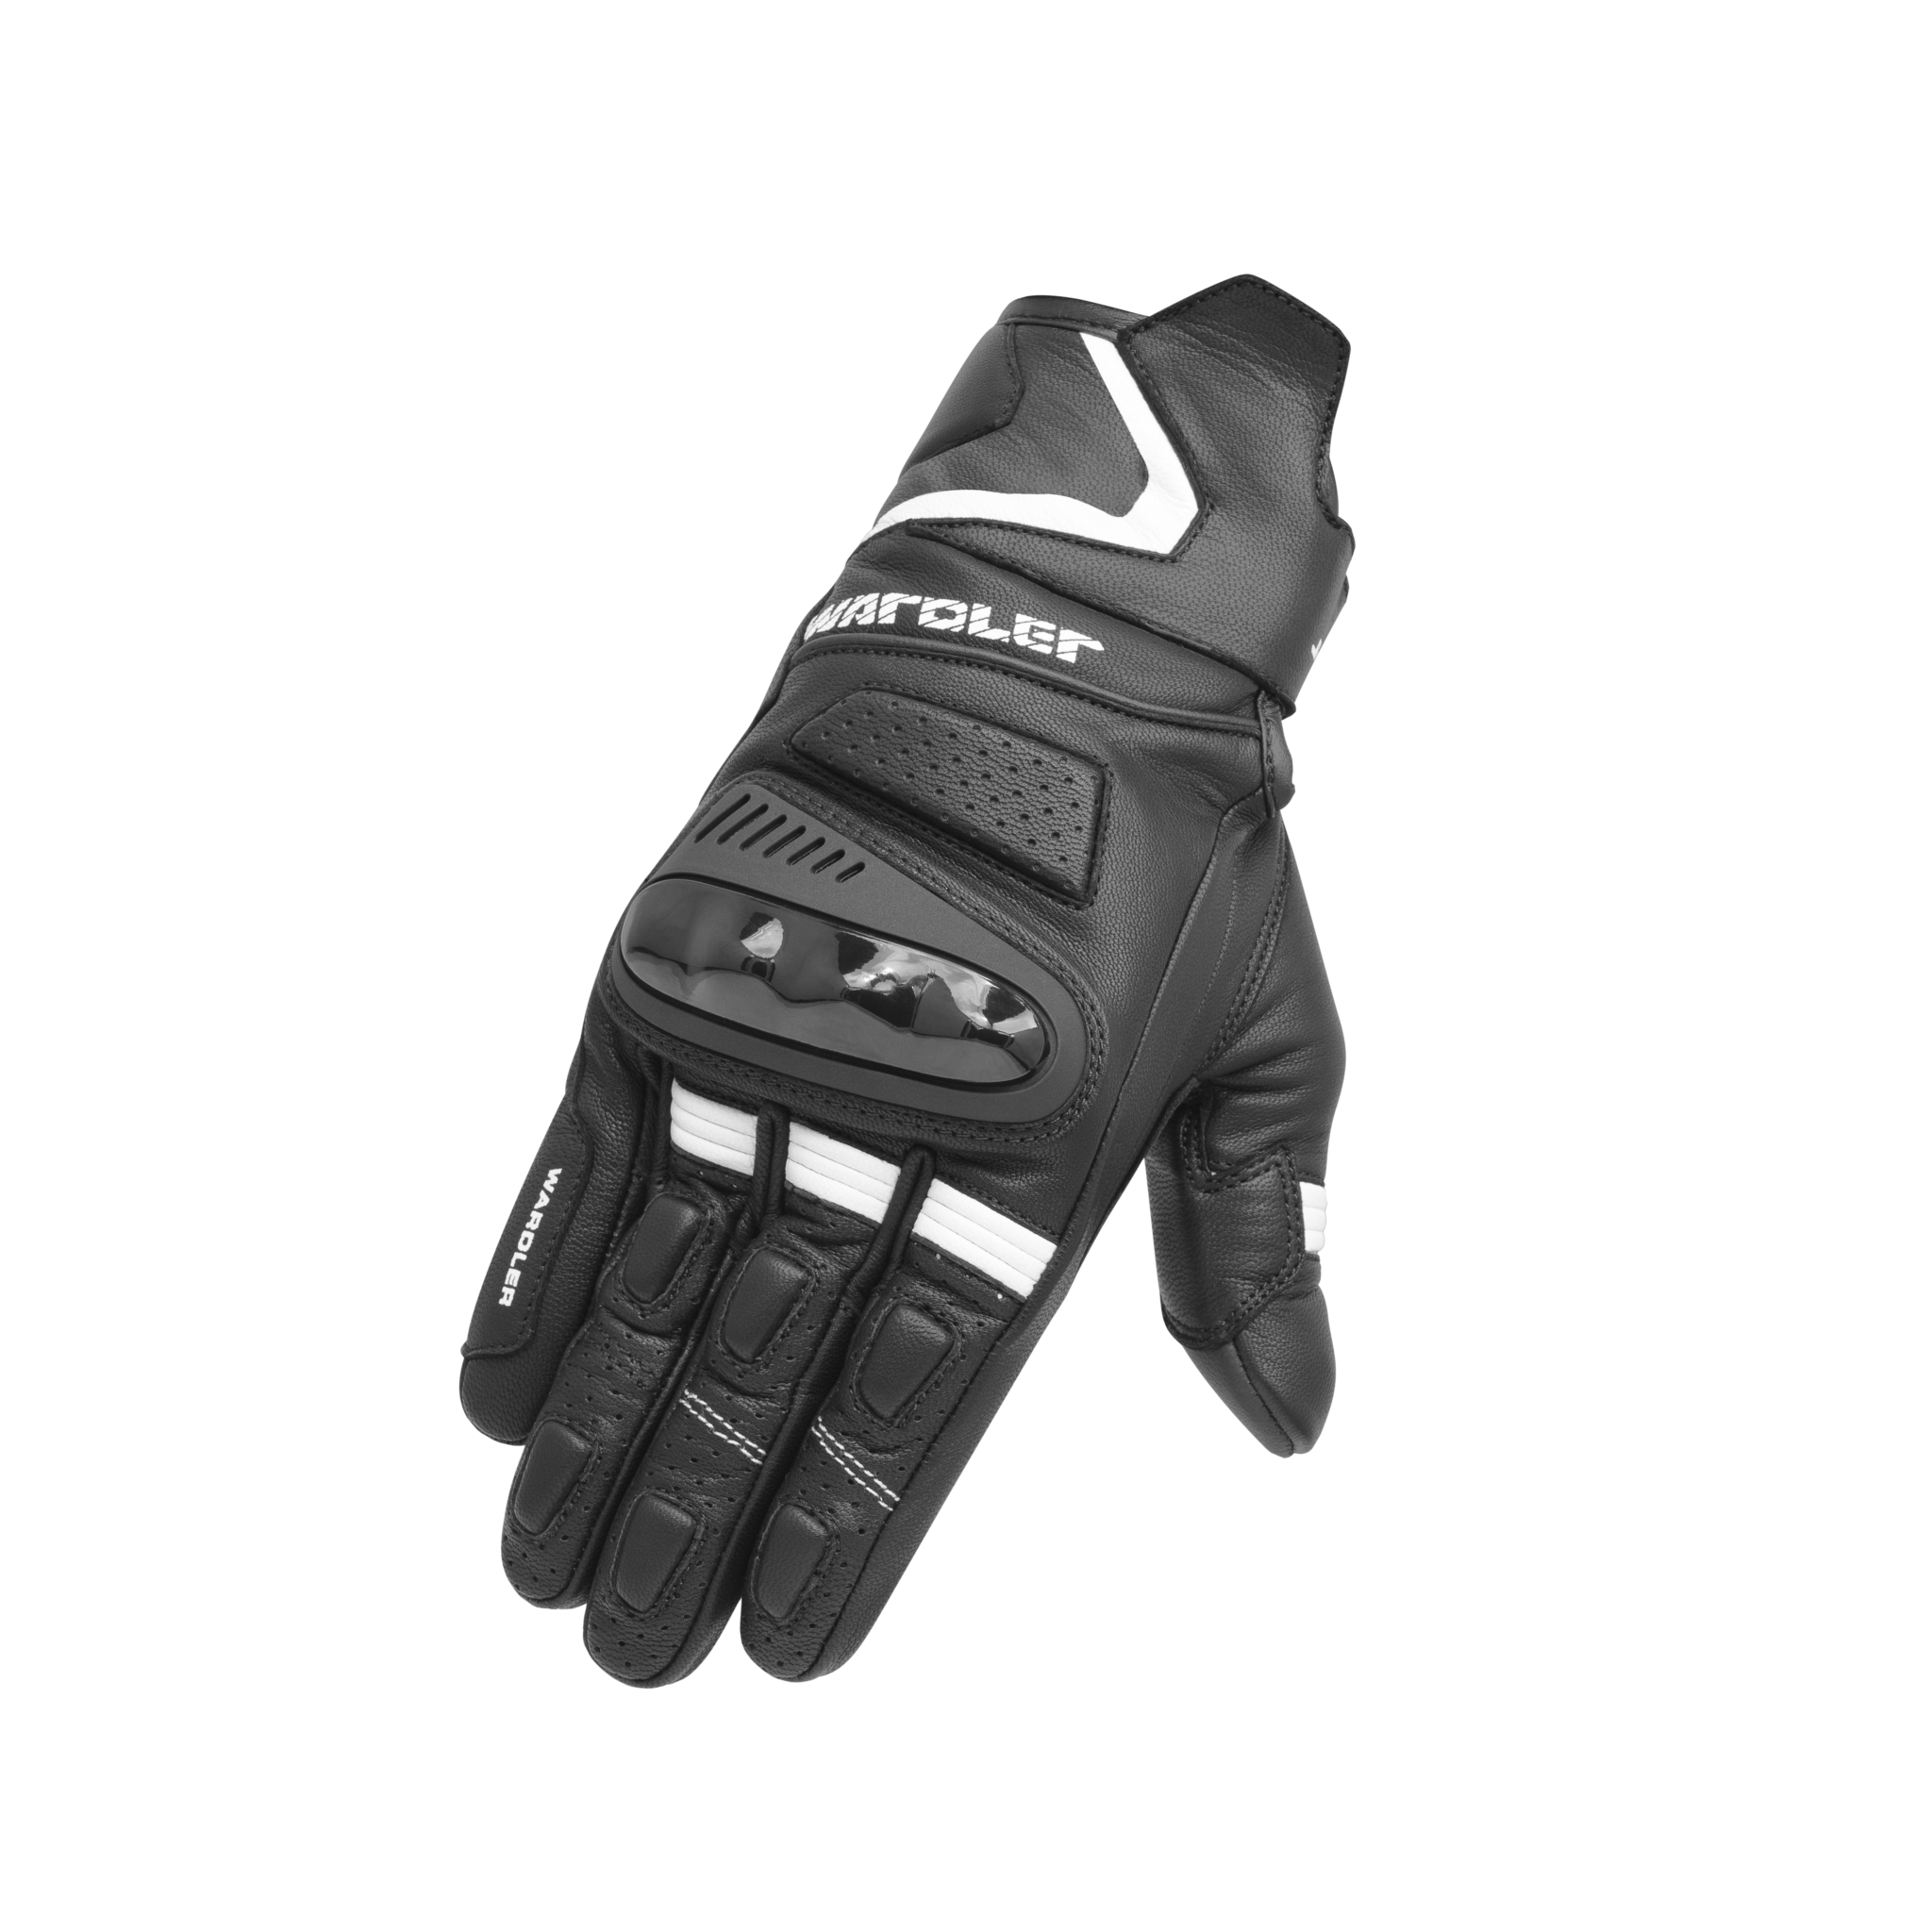 Vortex motorcycle gloves, TPU protection, breathable black-white front